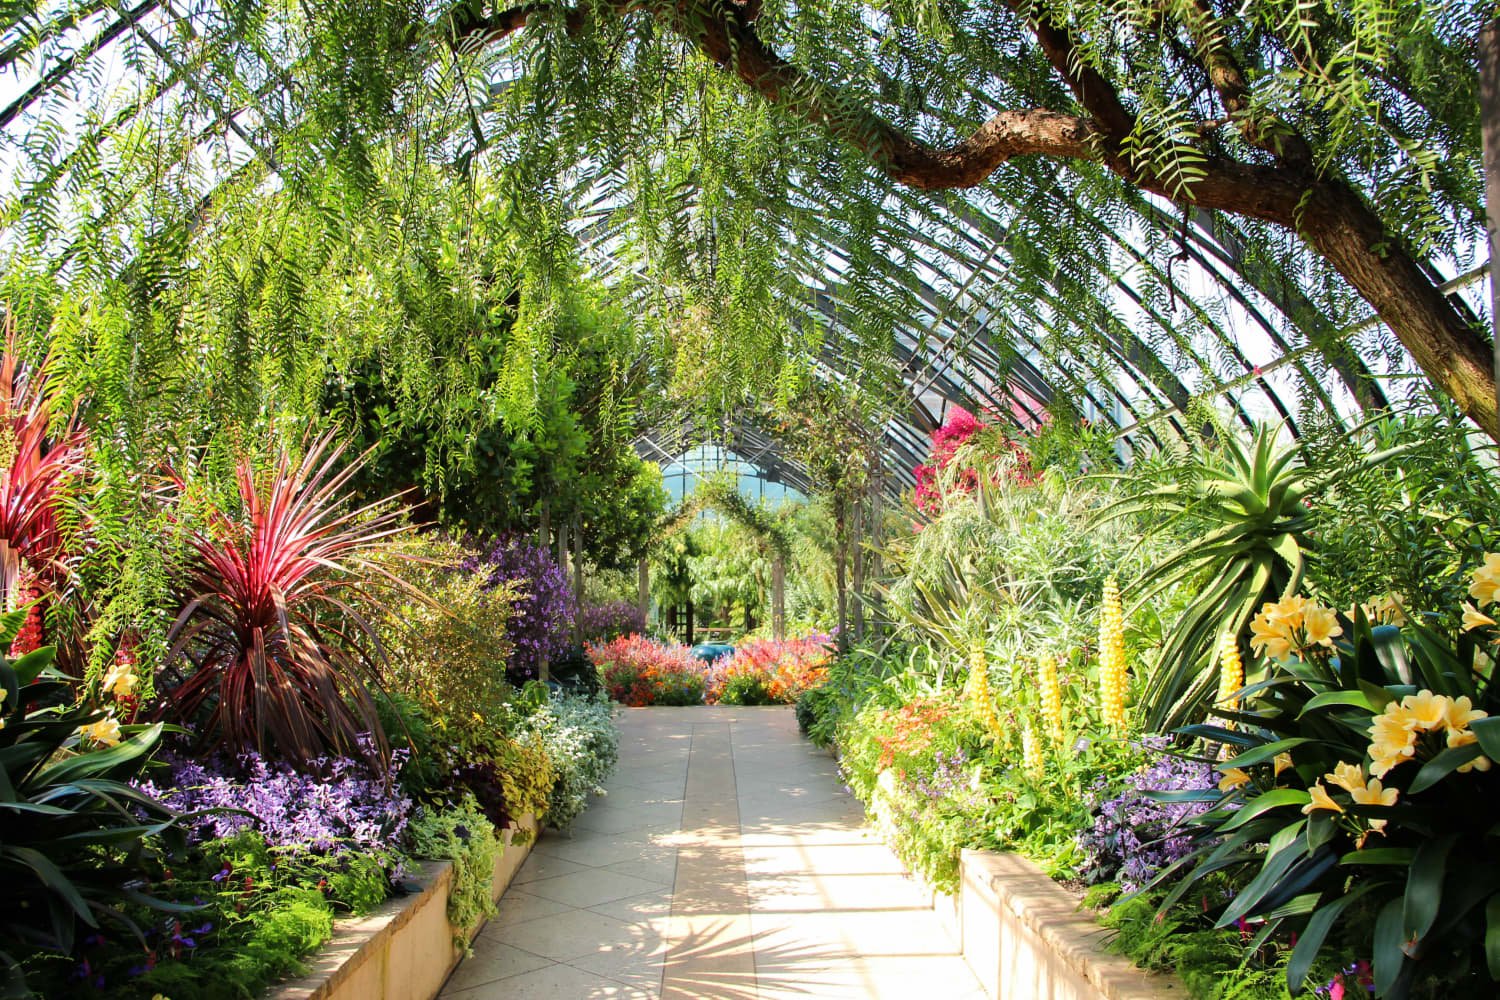 9 of the Biggest Botanic Gardens to Visit in the U.S.